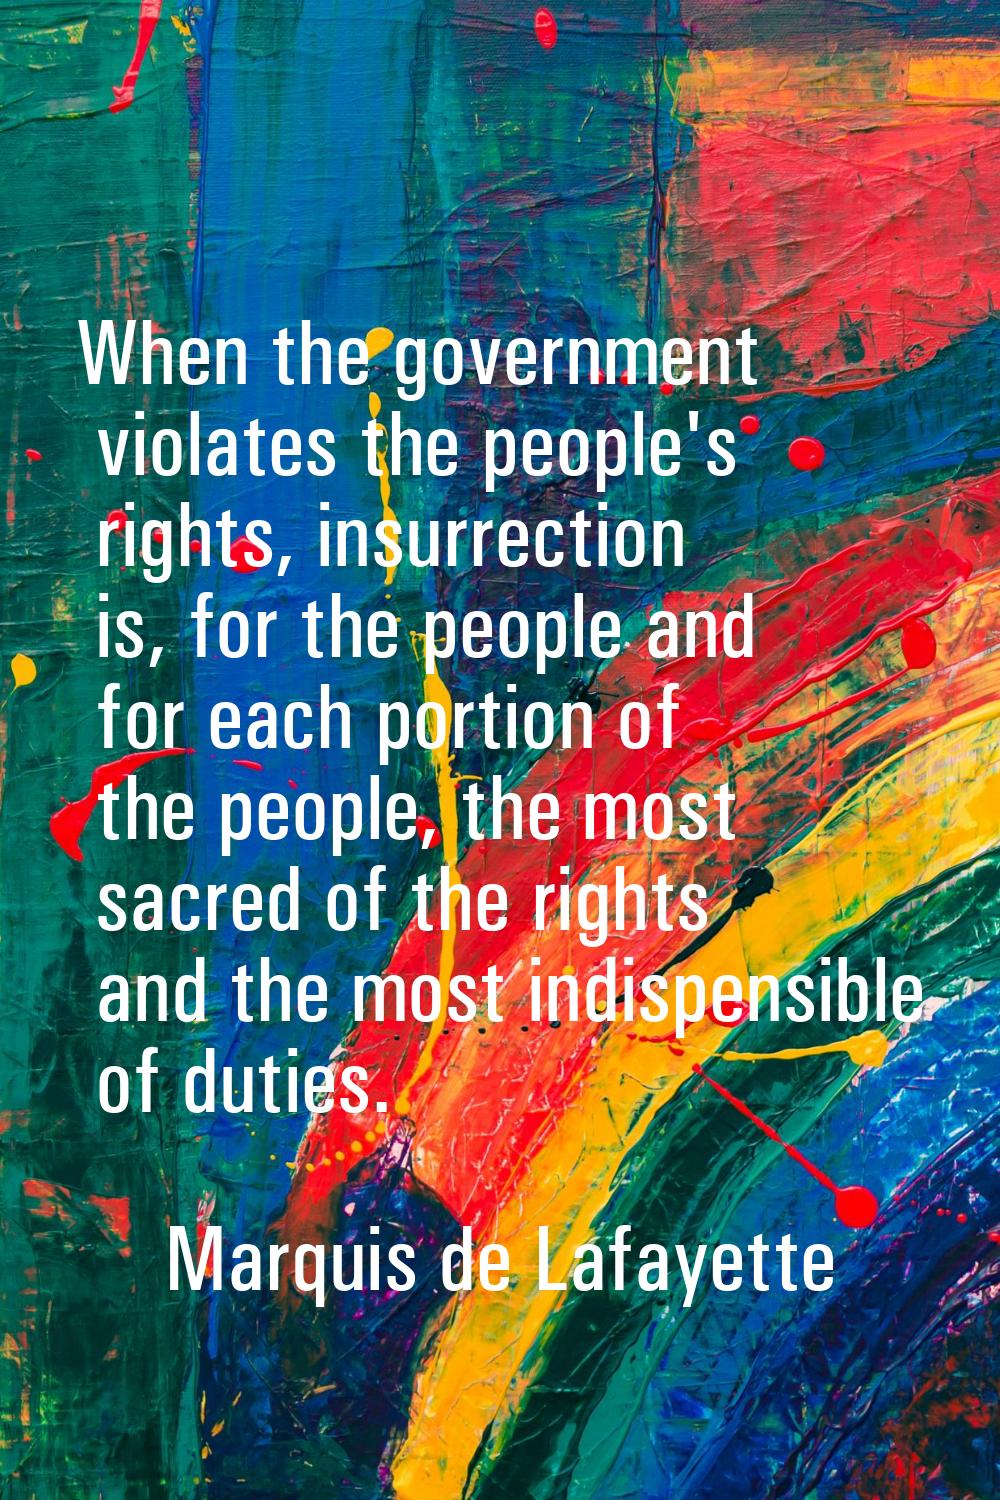 When the government violates the people's rights, insurrection is, for the people and for each port